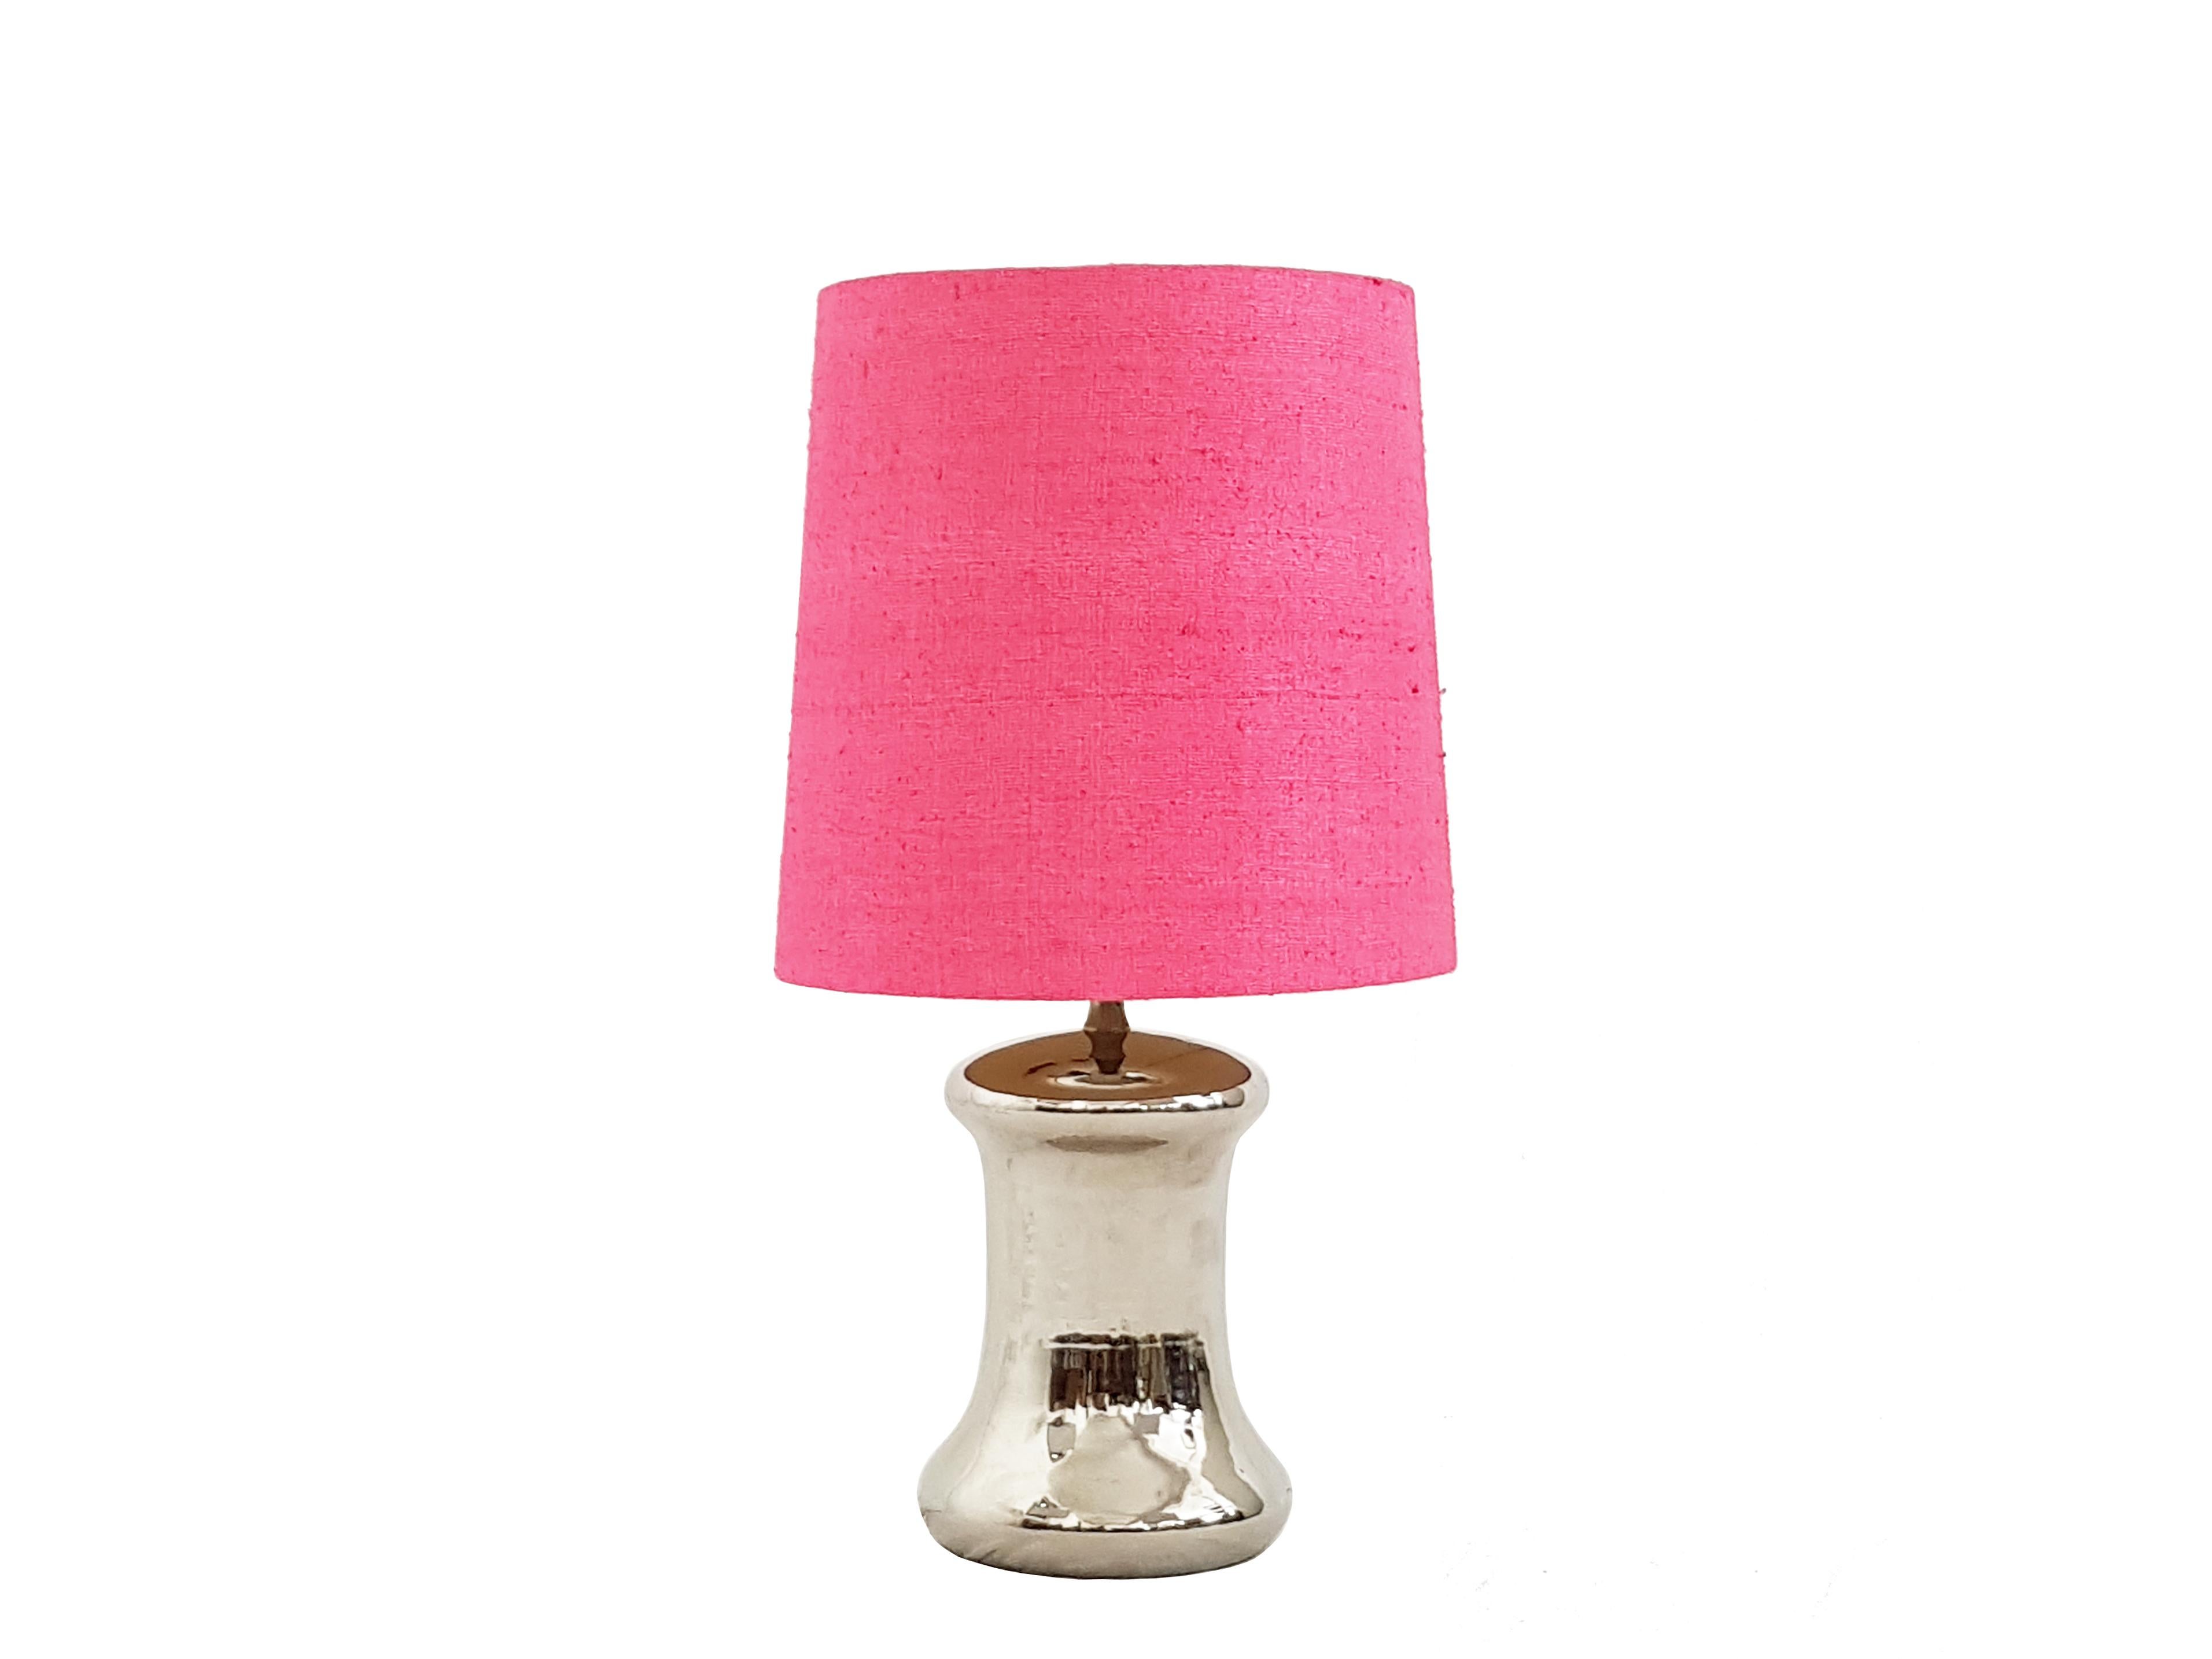 This pair of glam table lamps was produced in Italy around the 1970s. They are made from a silvered and glazed ceramic base, with a 3-lights adjustable electrical system. They are equipped with their original pink fabric shades, which remain in fair